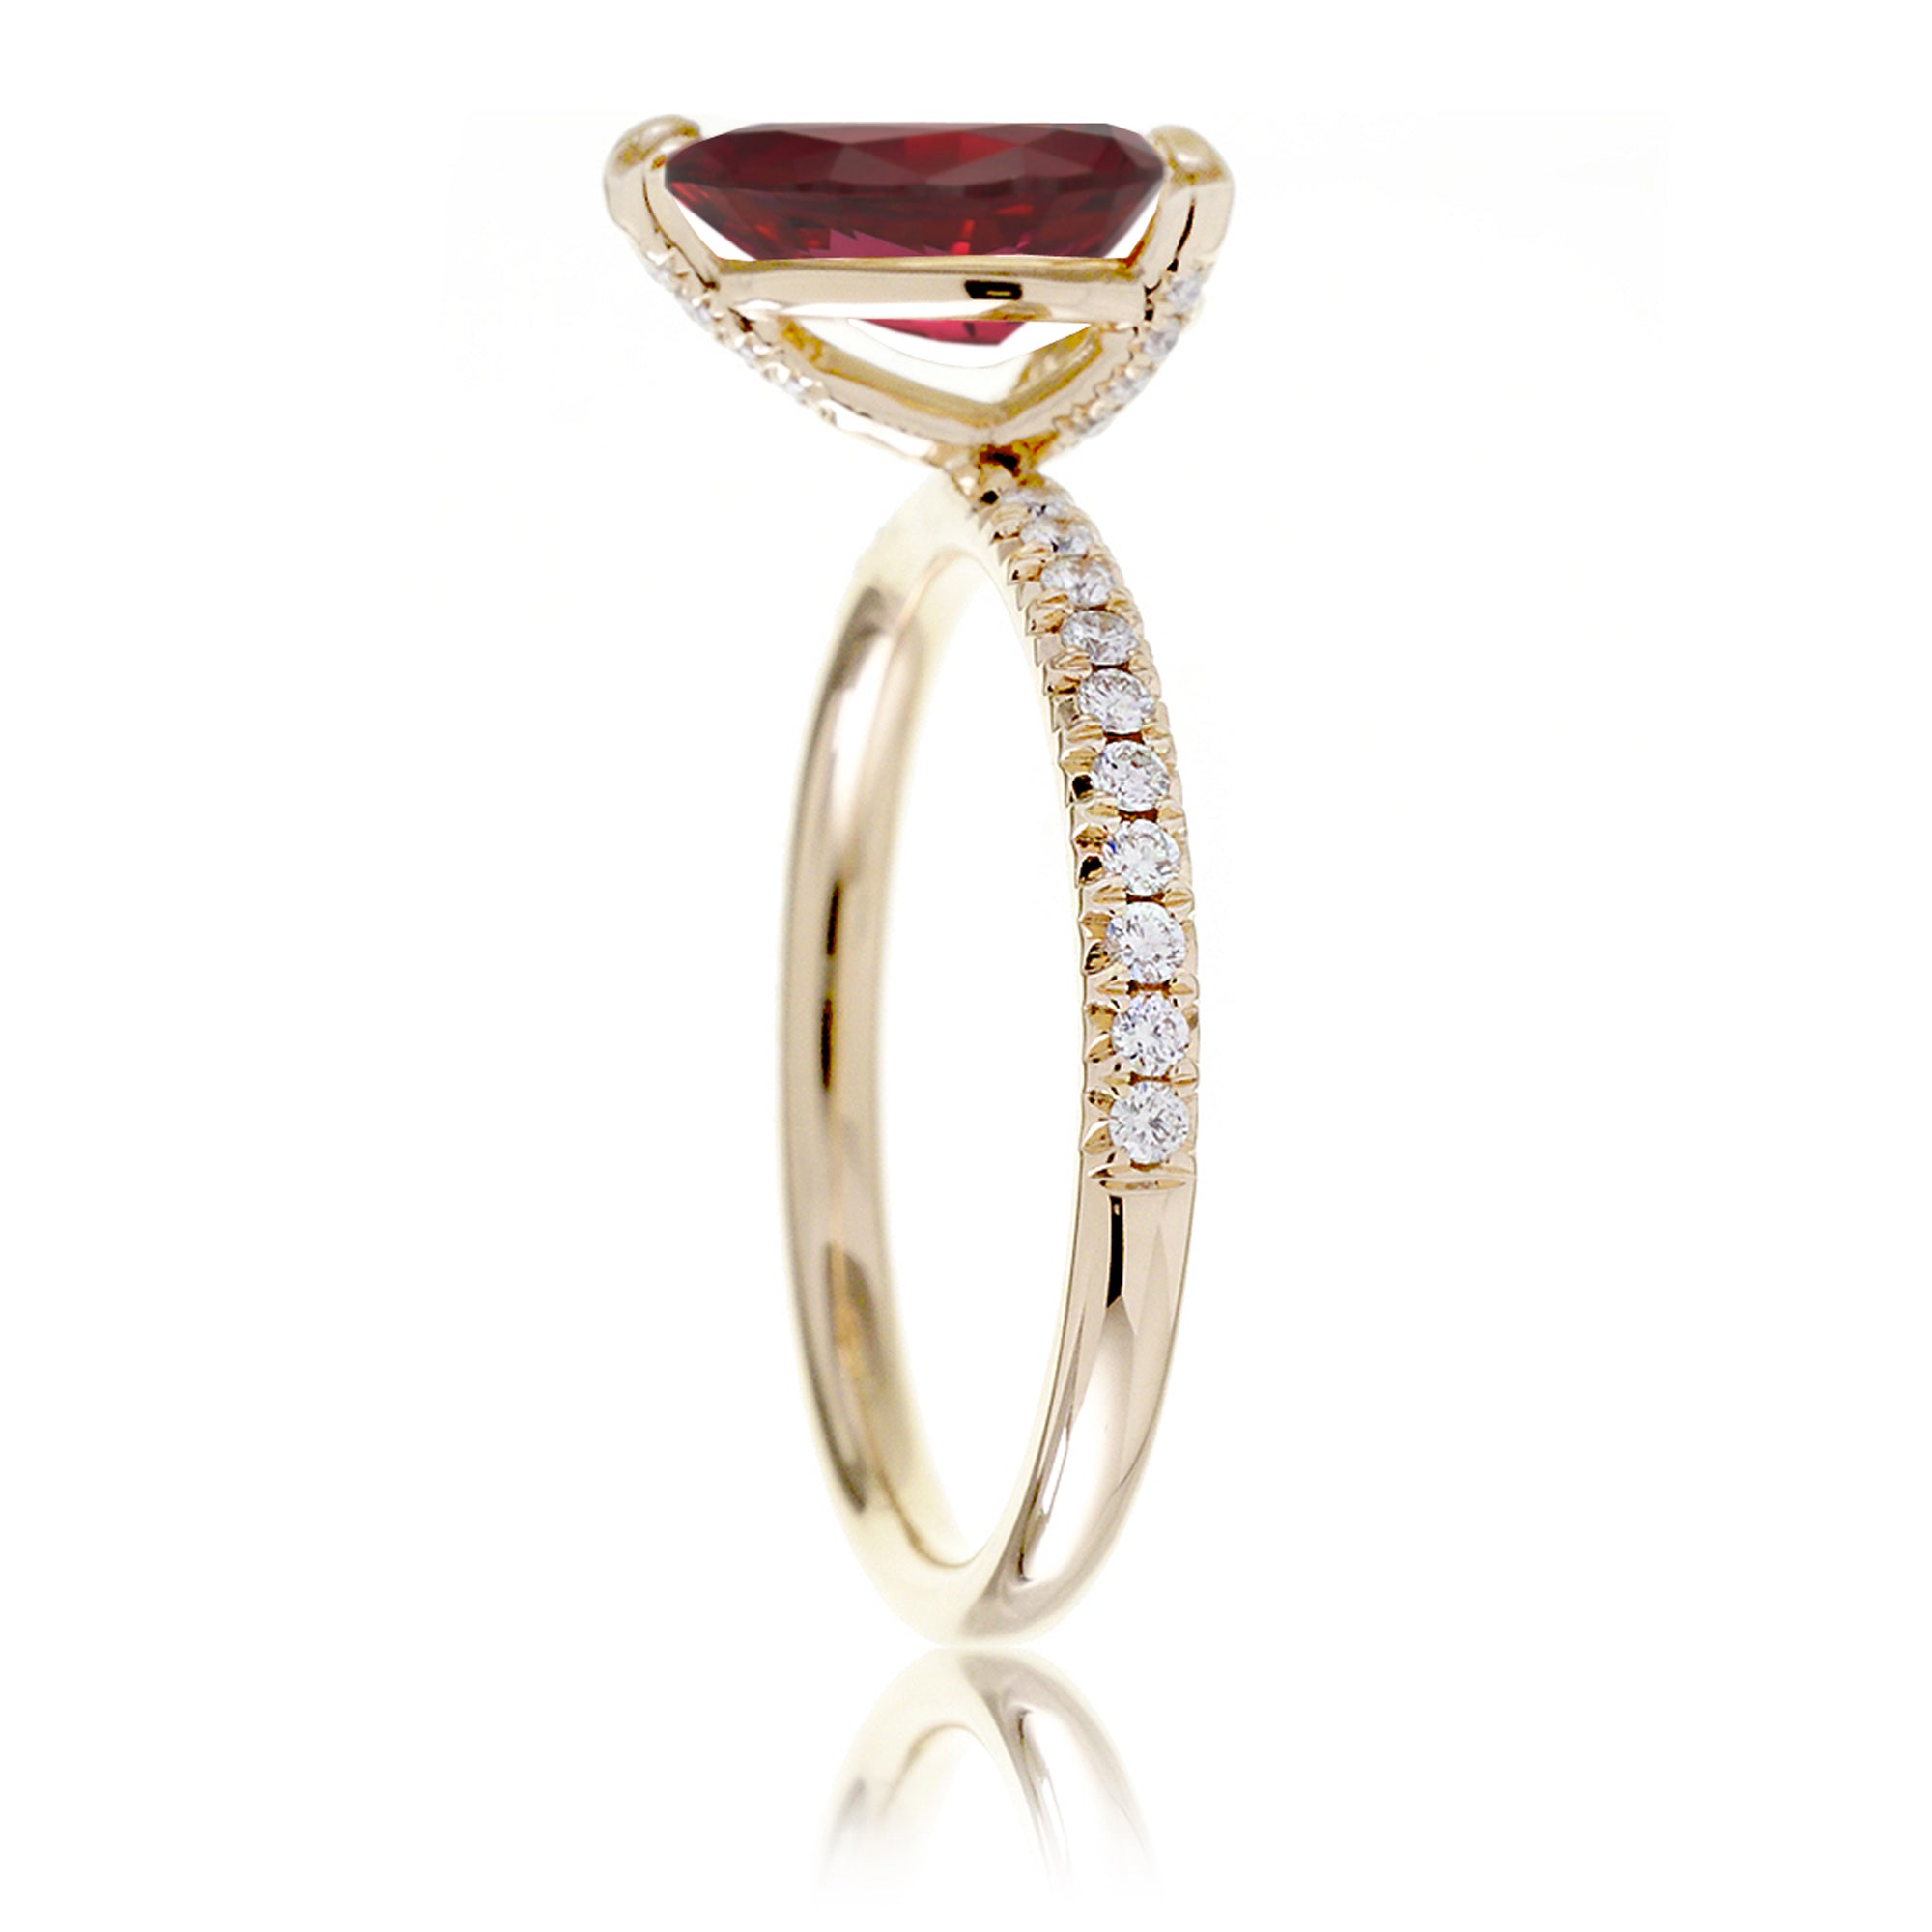 Pear cut lab-grown ruby engagement ring diamond band yellow gold - the Ava